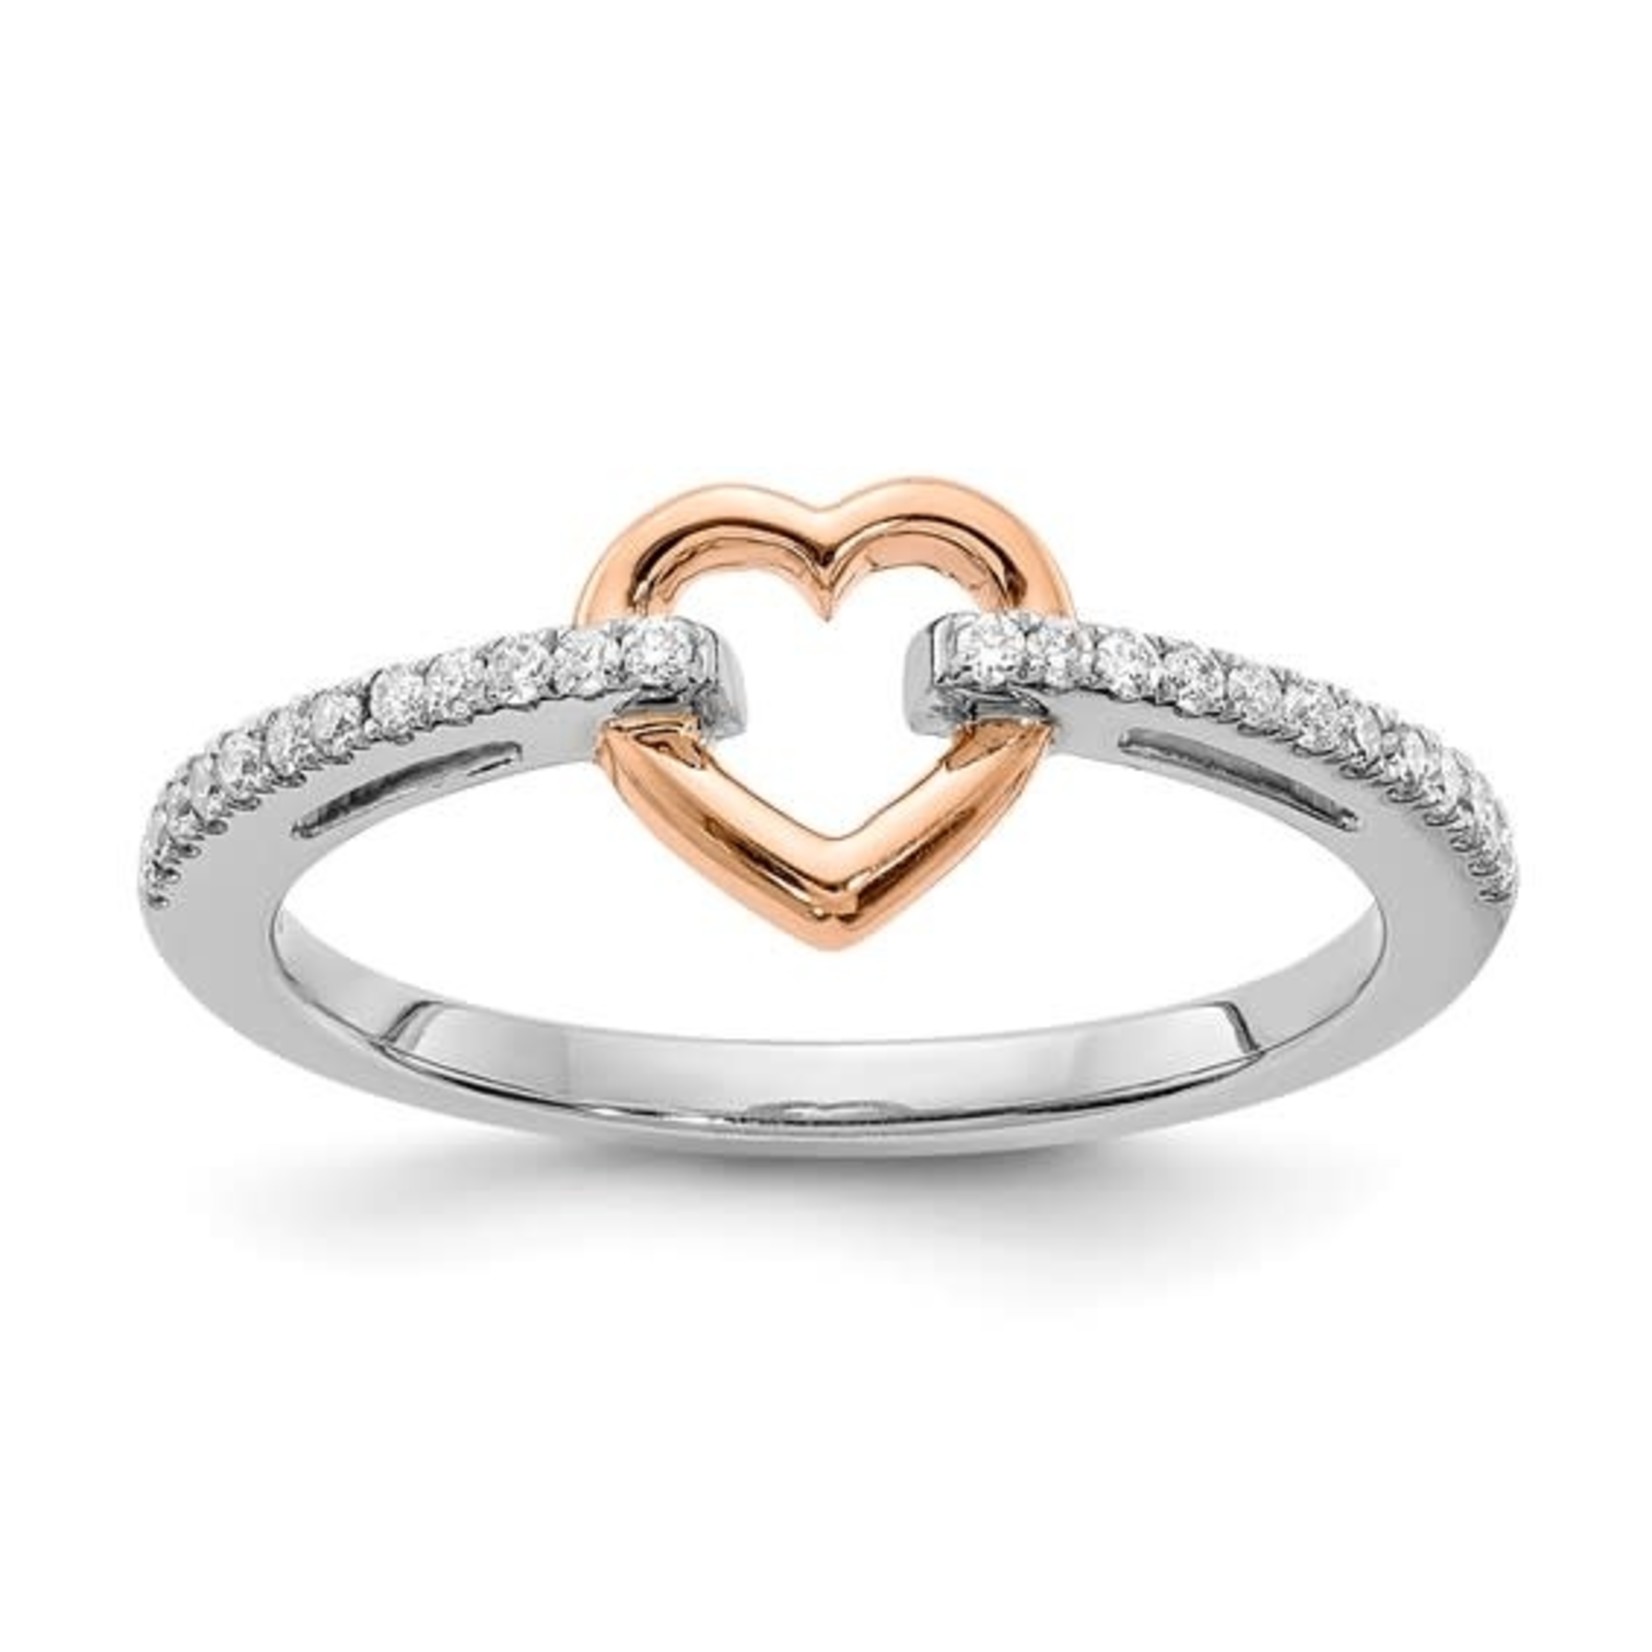 This Is Life Hold On To My Heart Sterling Silver With CZ Ring